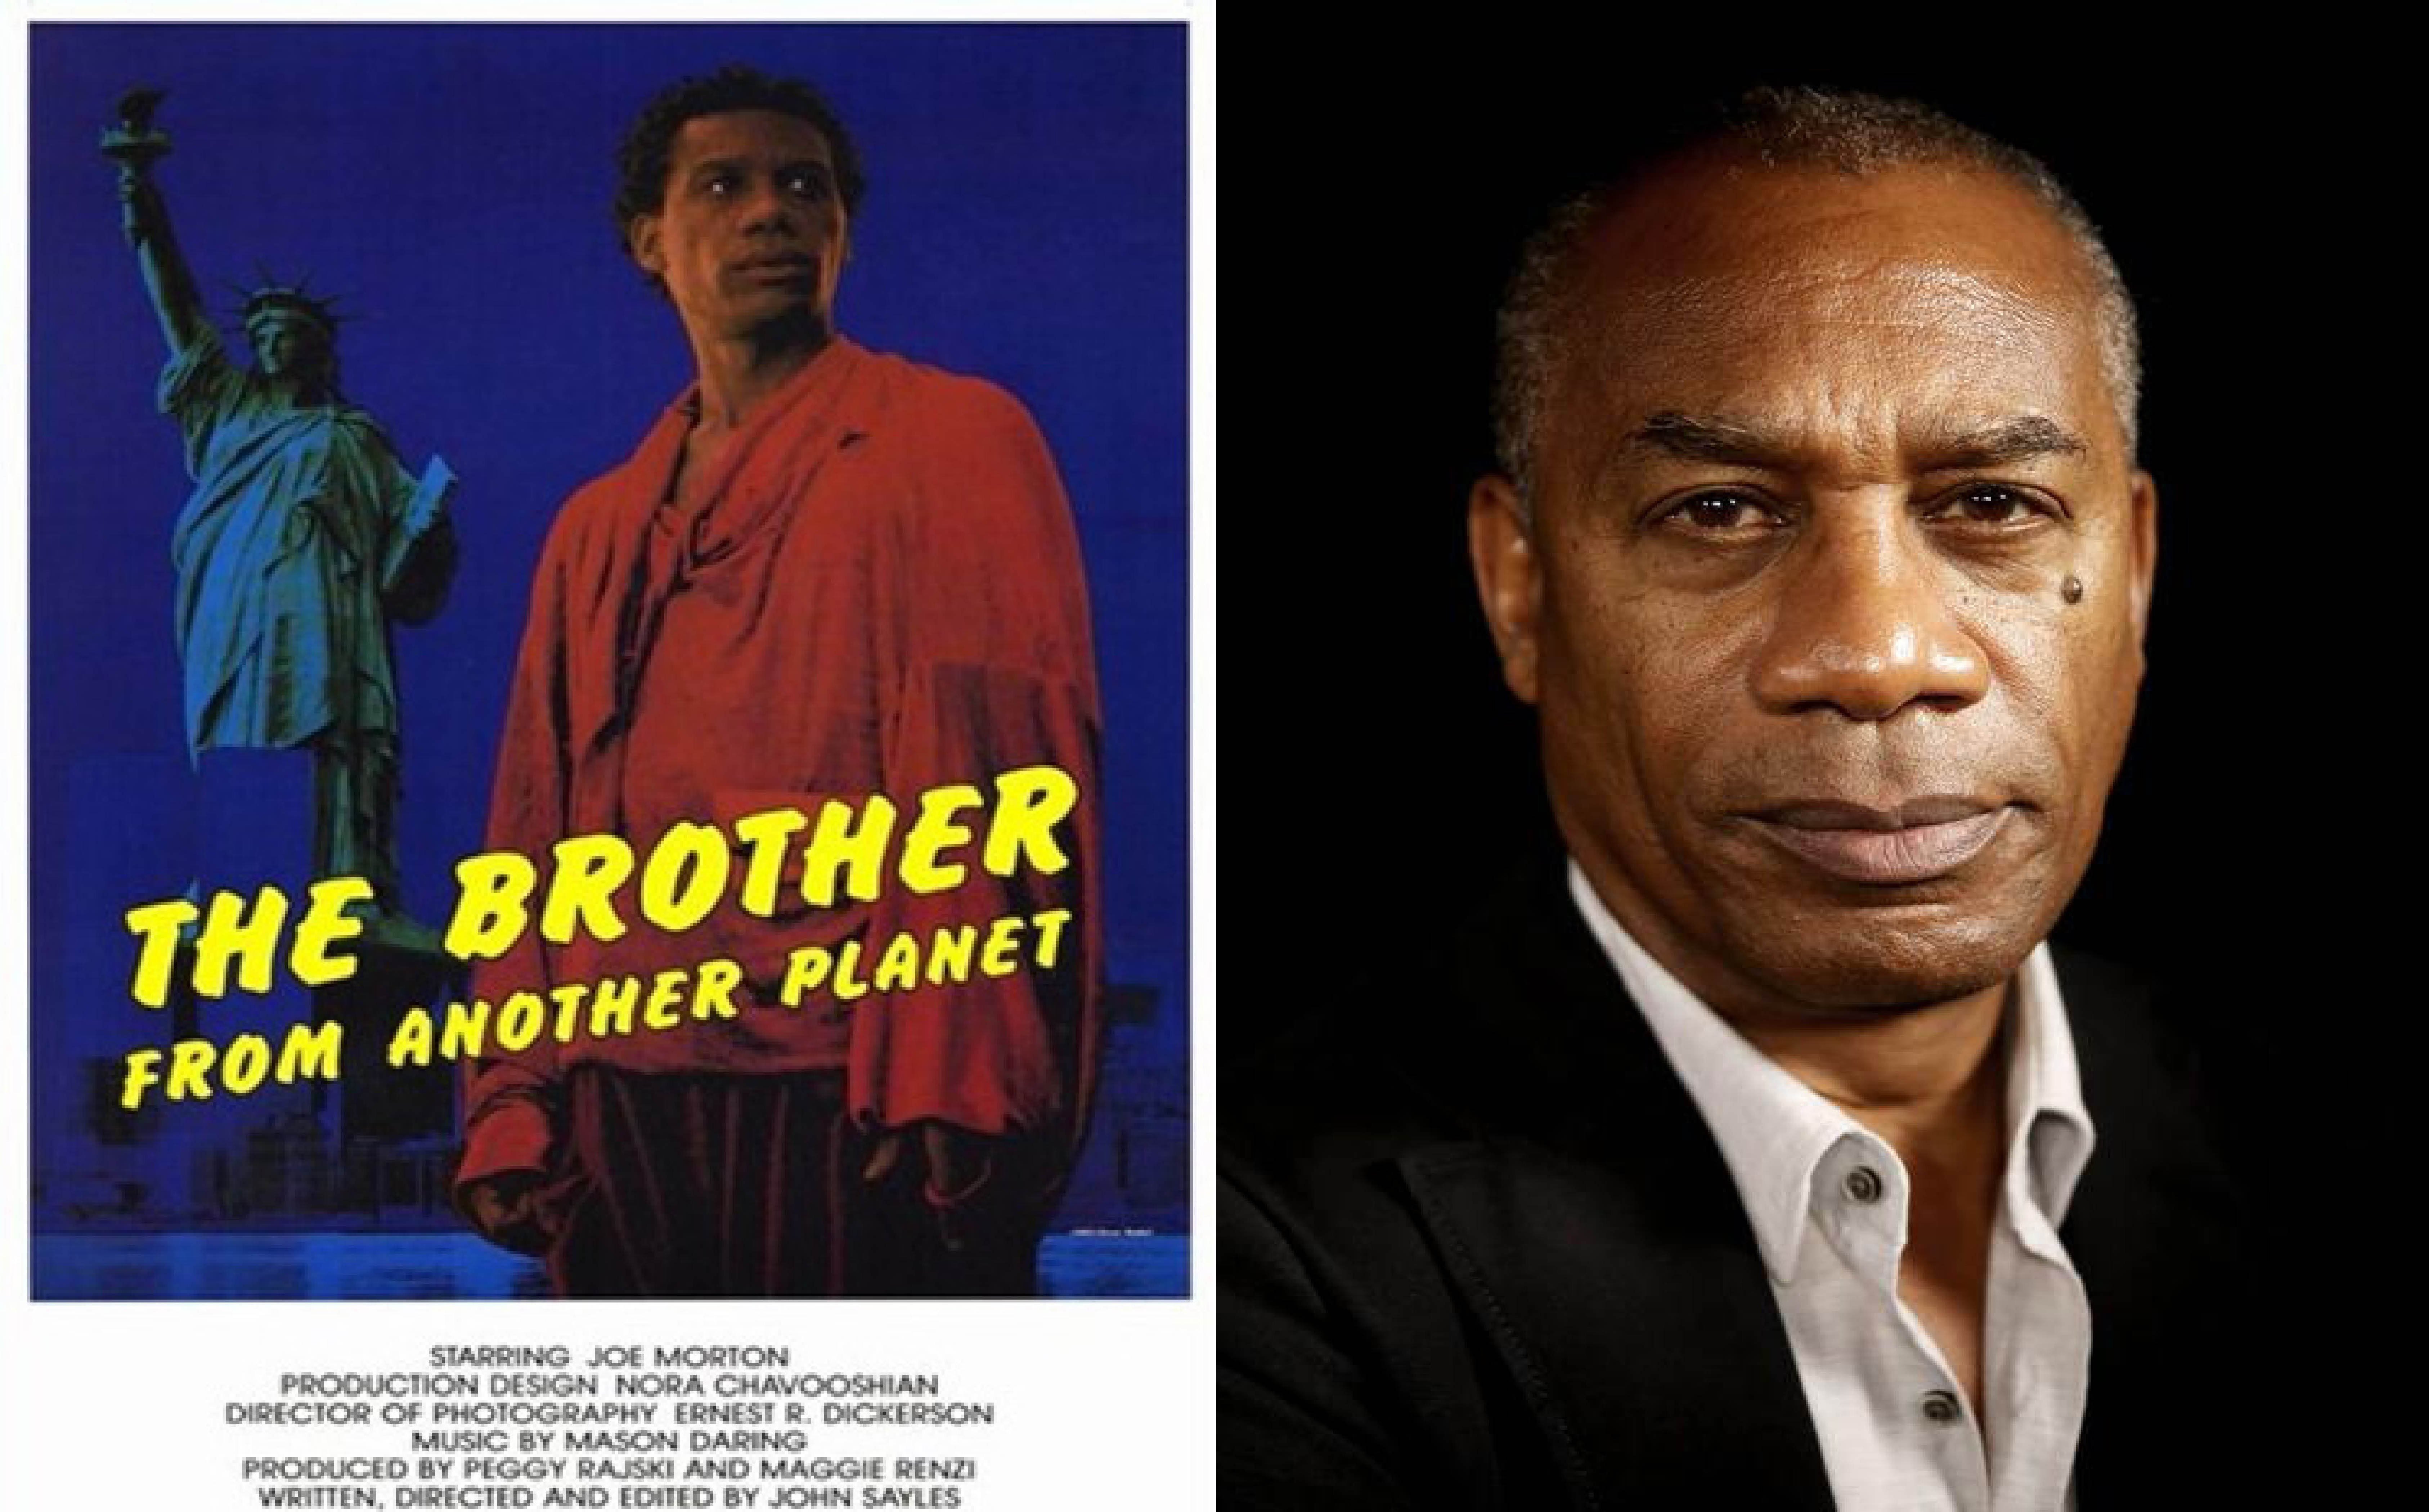 From left to right: The movie poster for “The Brother from Another Planet.” A man wearing a red long-sleeved shirt is looking to the right. Behind him is the Statue of Liberty. To the right of the movie poster is Joe Morton’s headshot. 